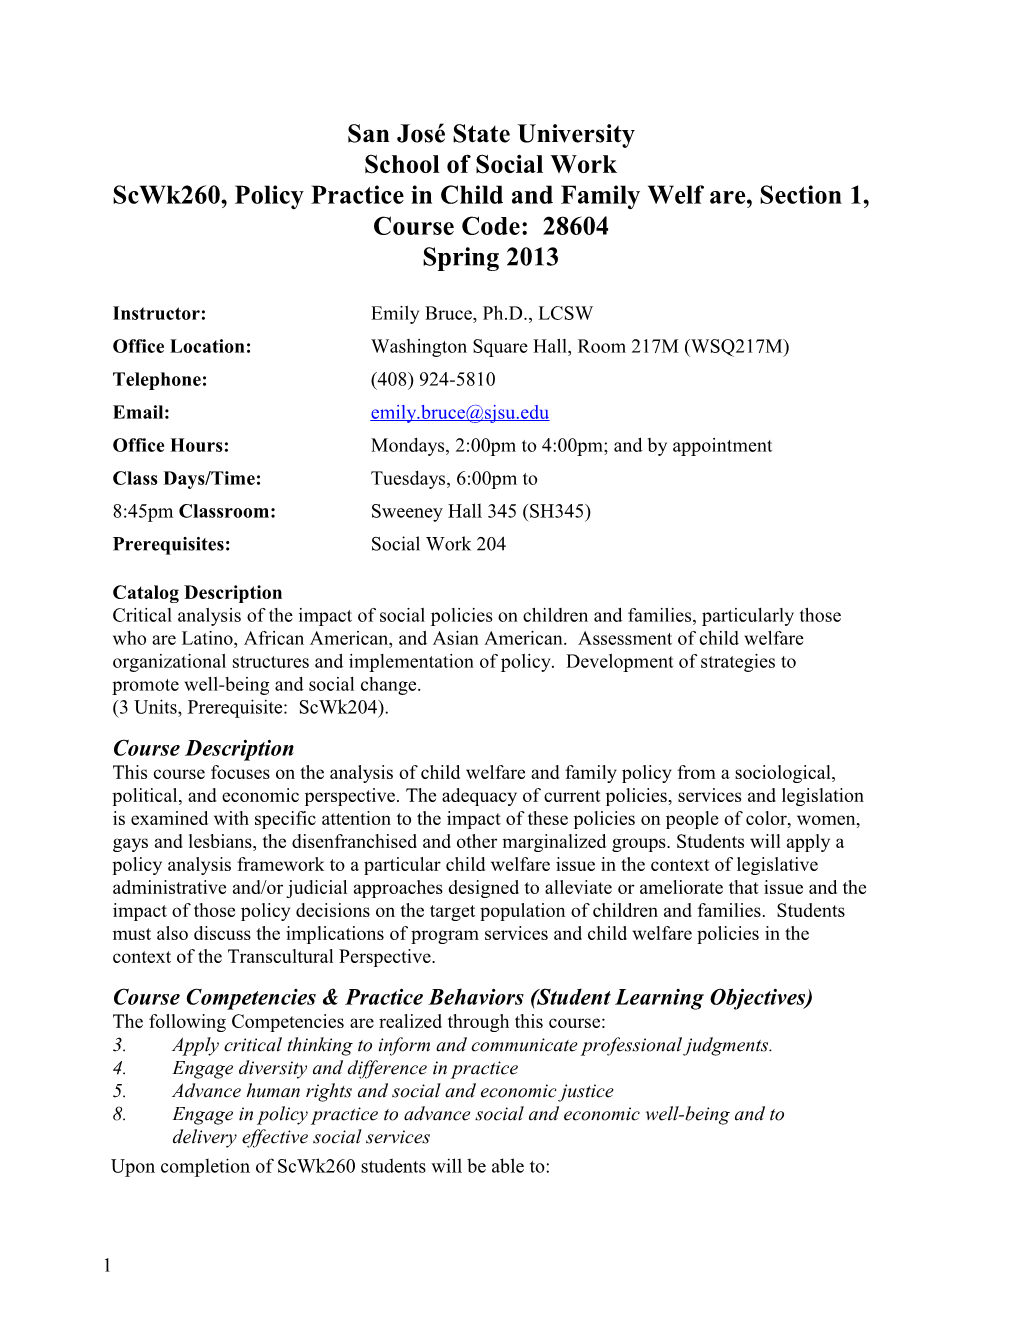 Scwk260, Policy Practice in Child and Family Welf Are, Section 1